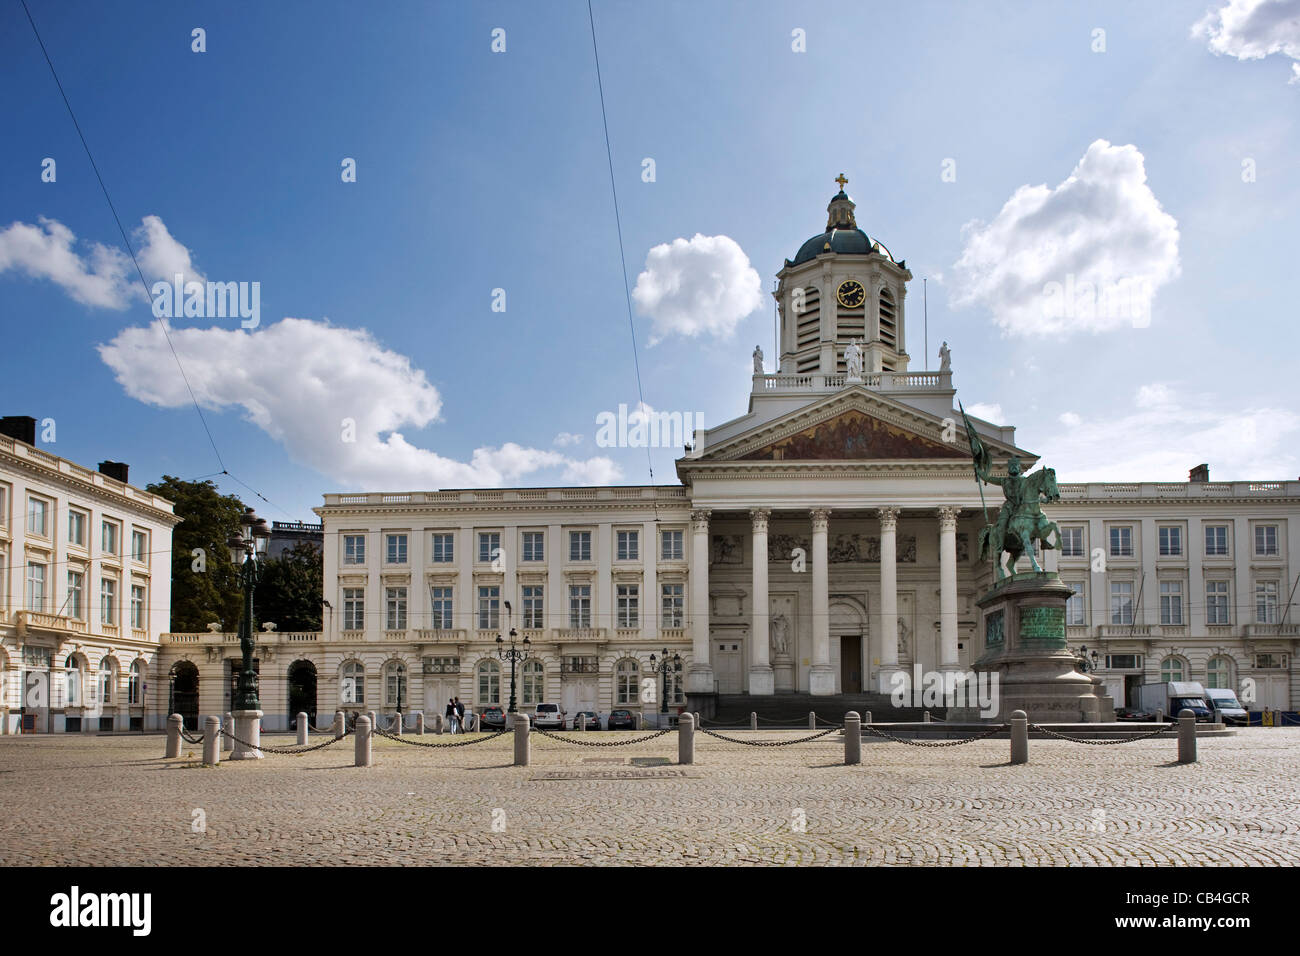 The Place Royale with statue of Godfrey of Bouillon and the Church of Saint Jacques-sur-Coudenberg, Brussels, Belgium Stock Photo